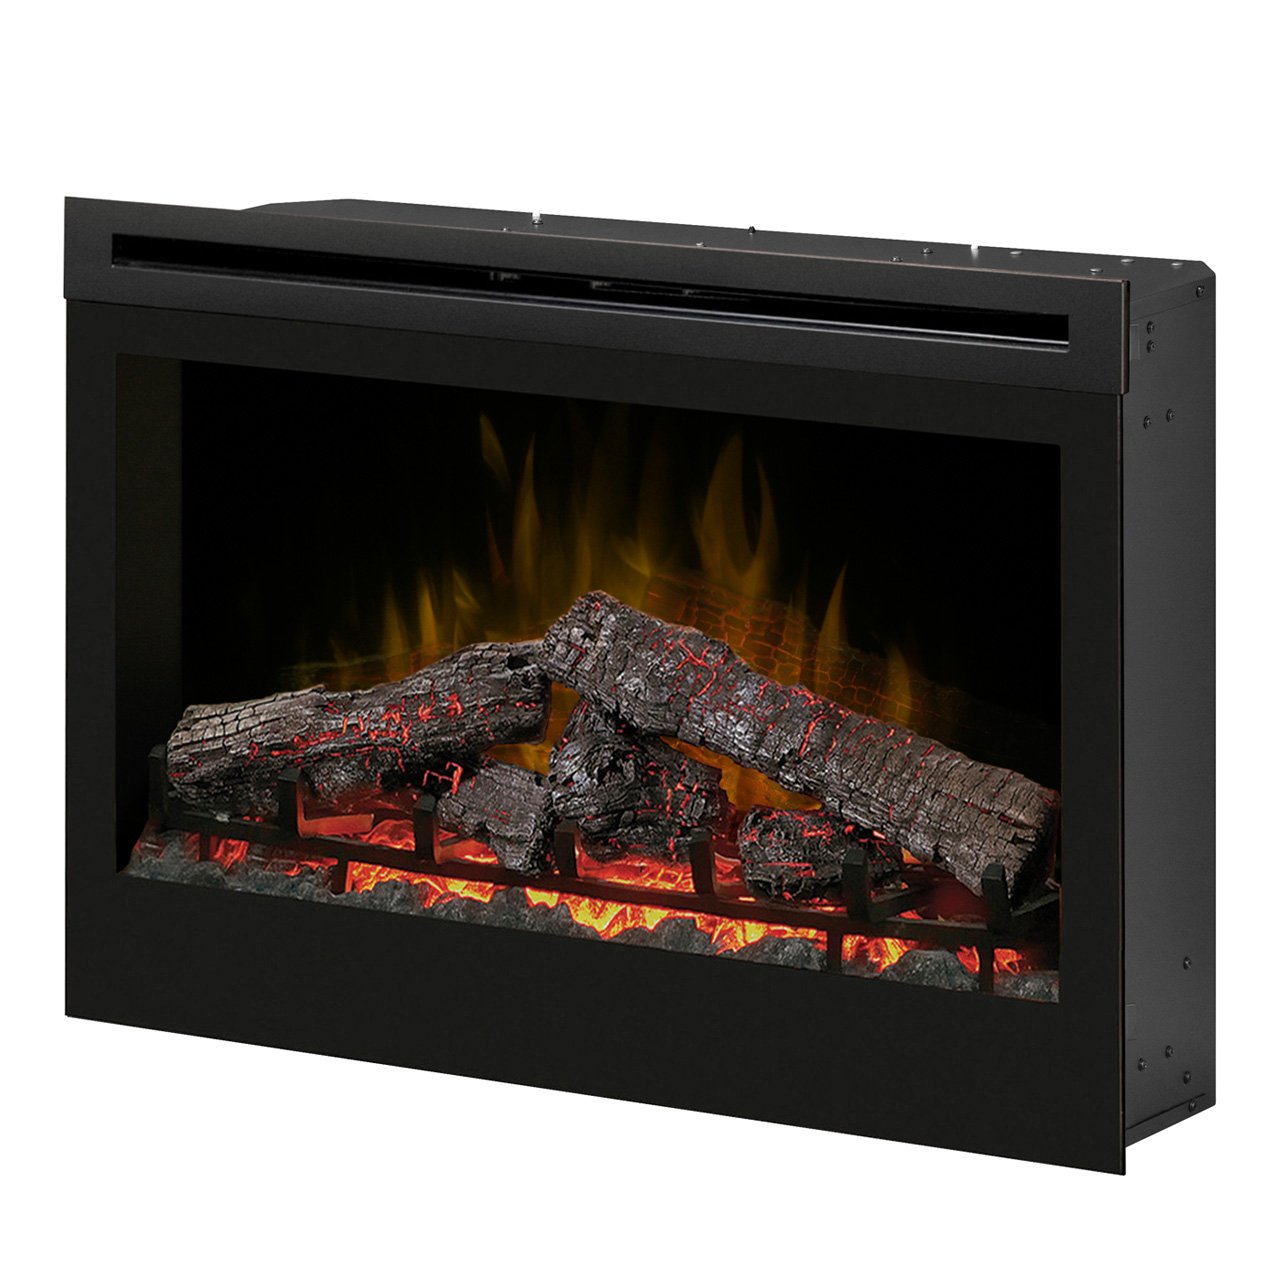 Best Looking Electric Fireplace Best Of Dimplex Df3033st 33 Inch Self Trimming Electric Fireplace Insert